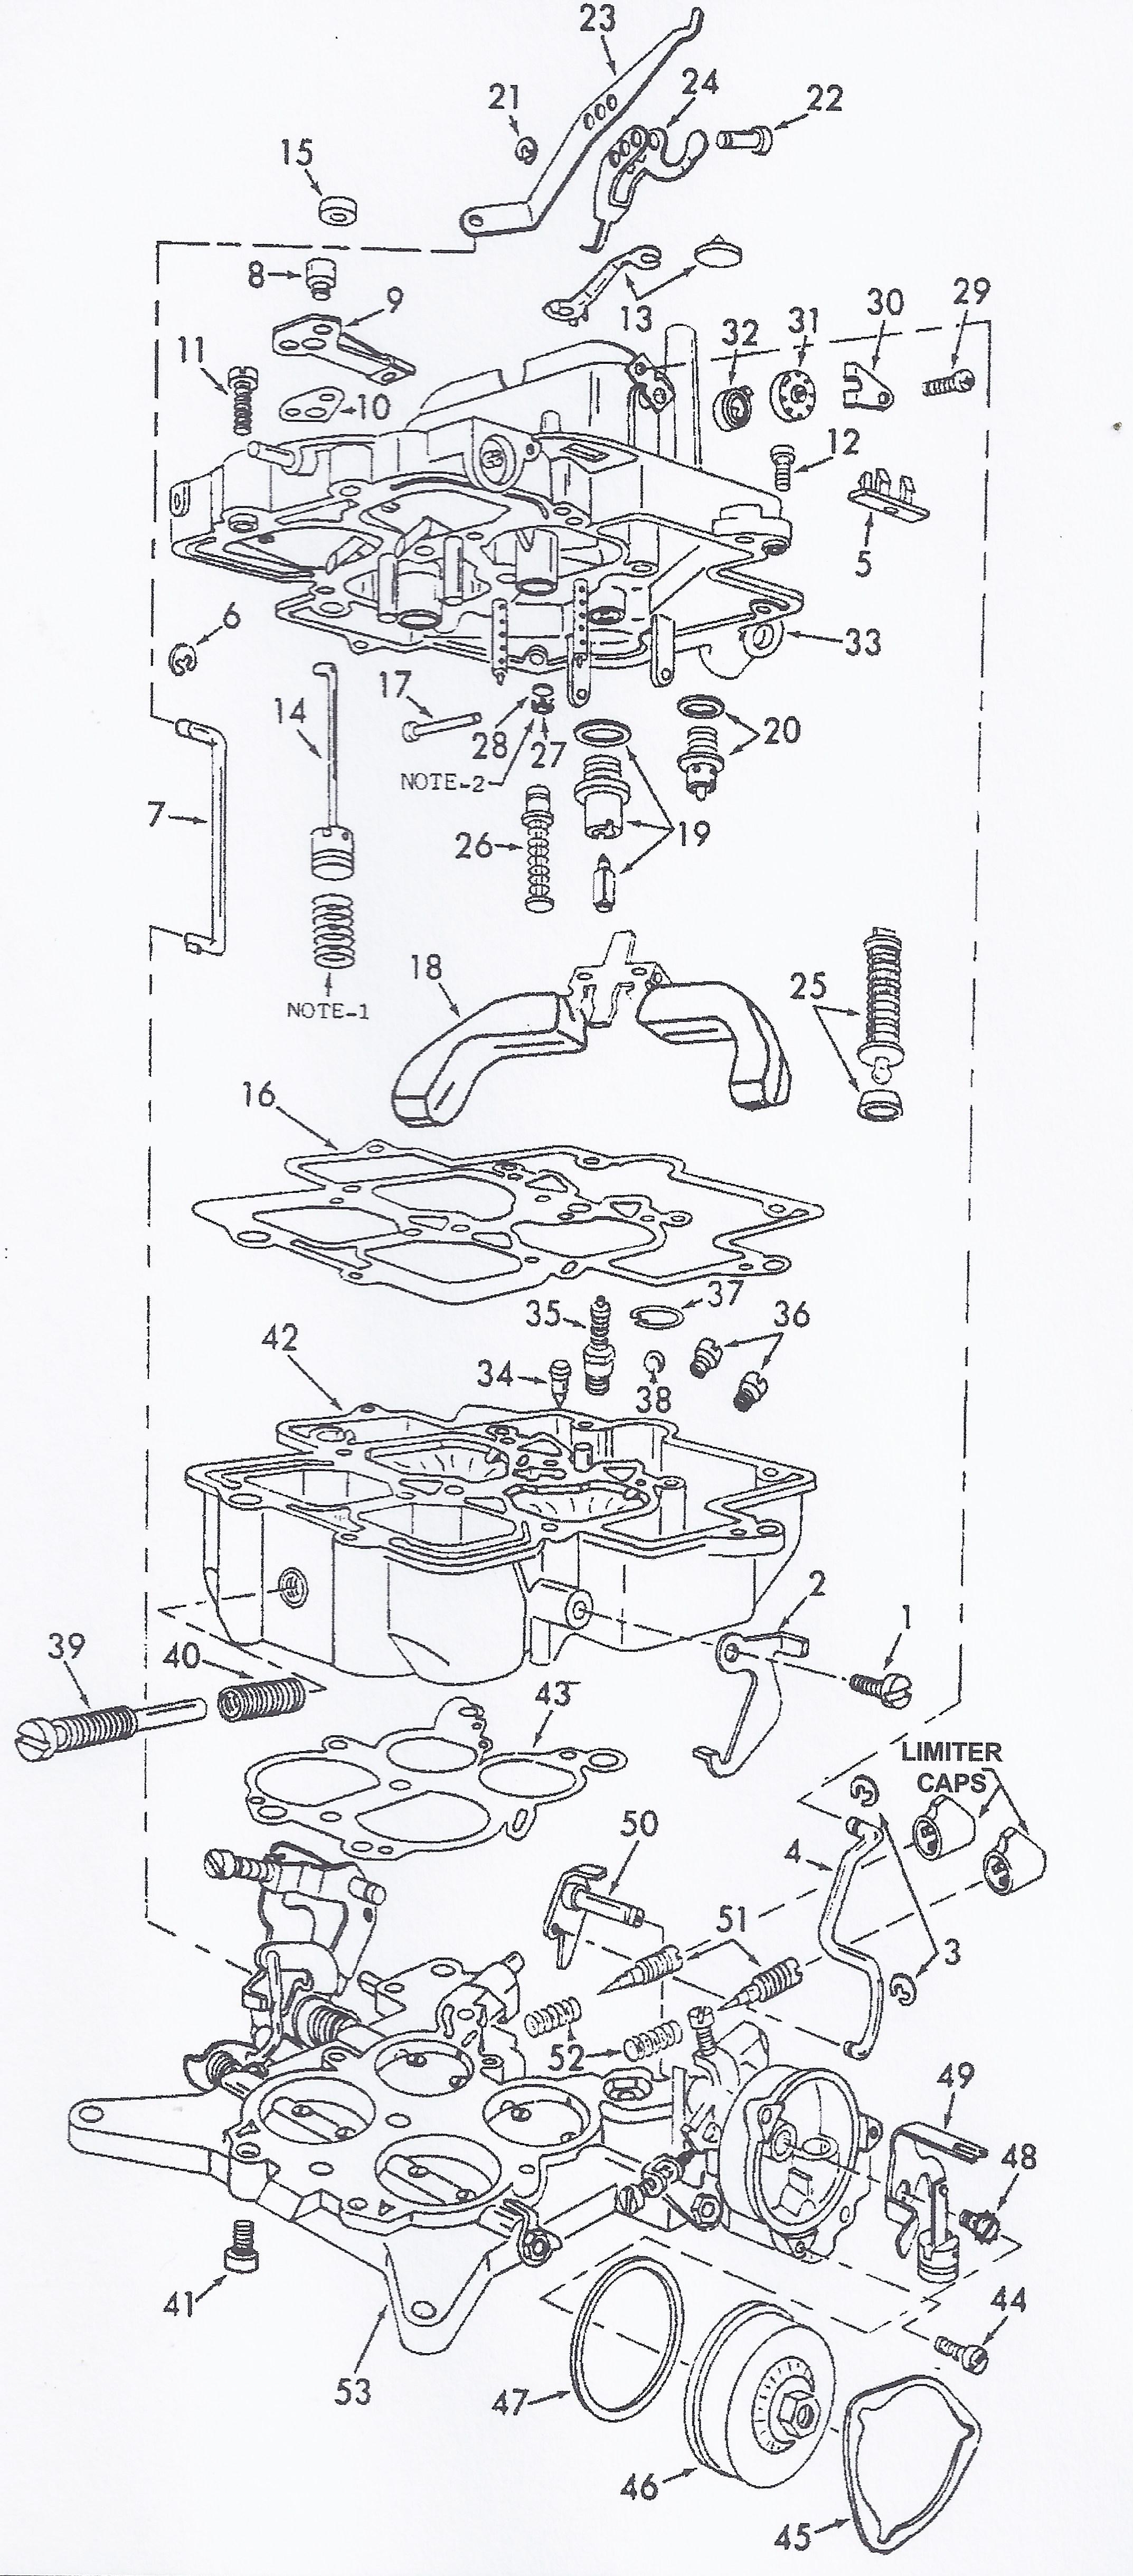 4300 Exploded View 68 plymouth wiring diagram 